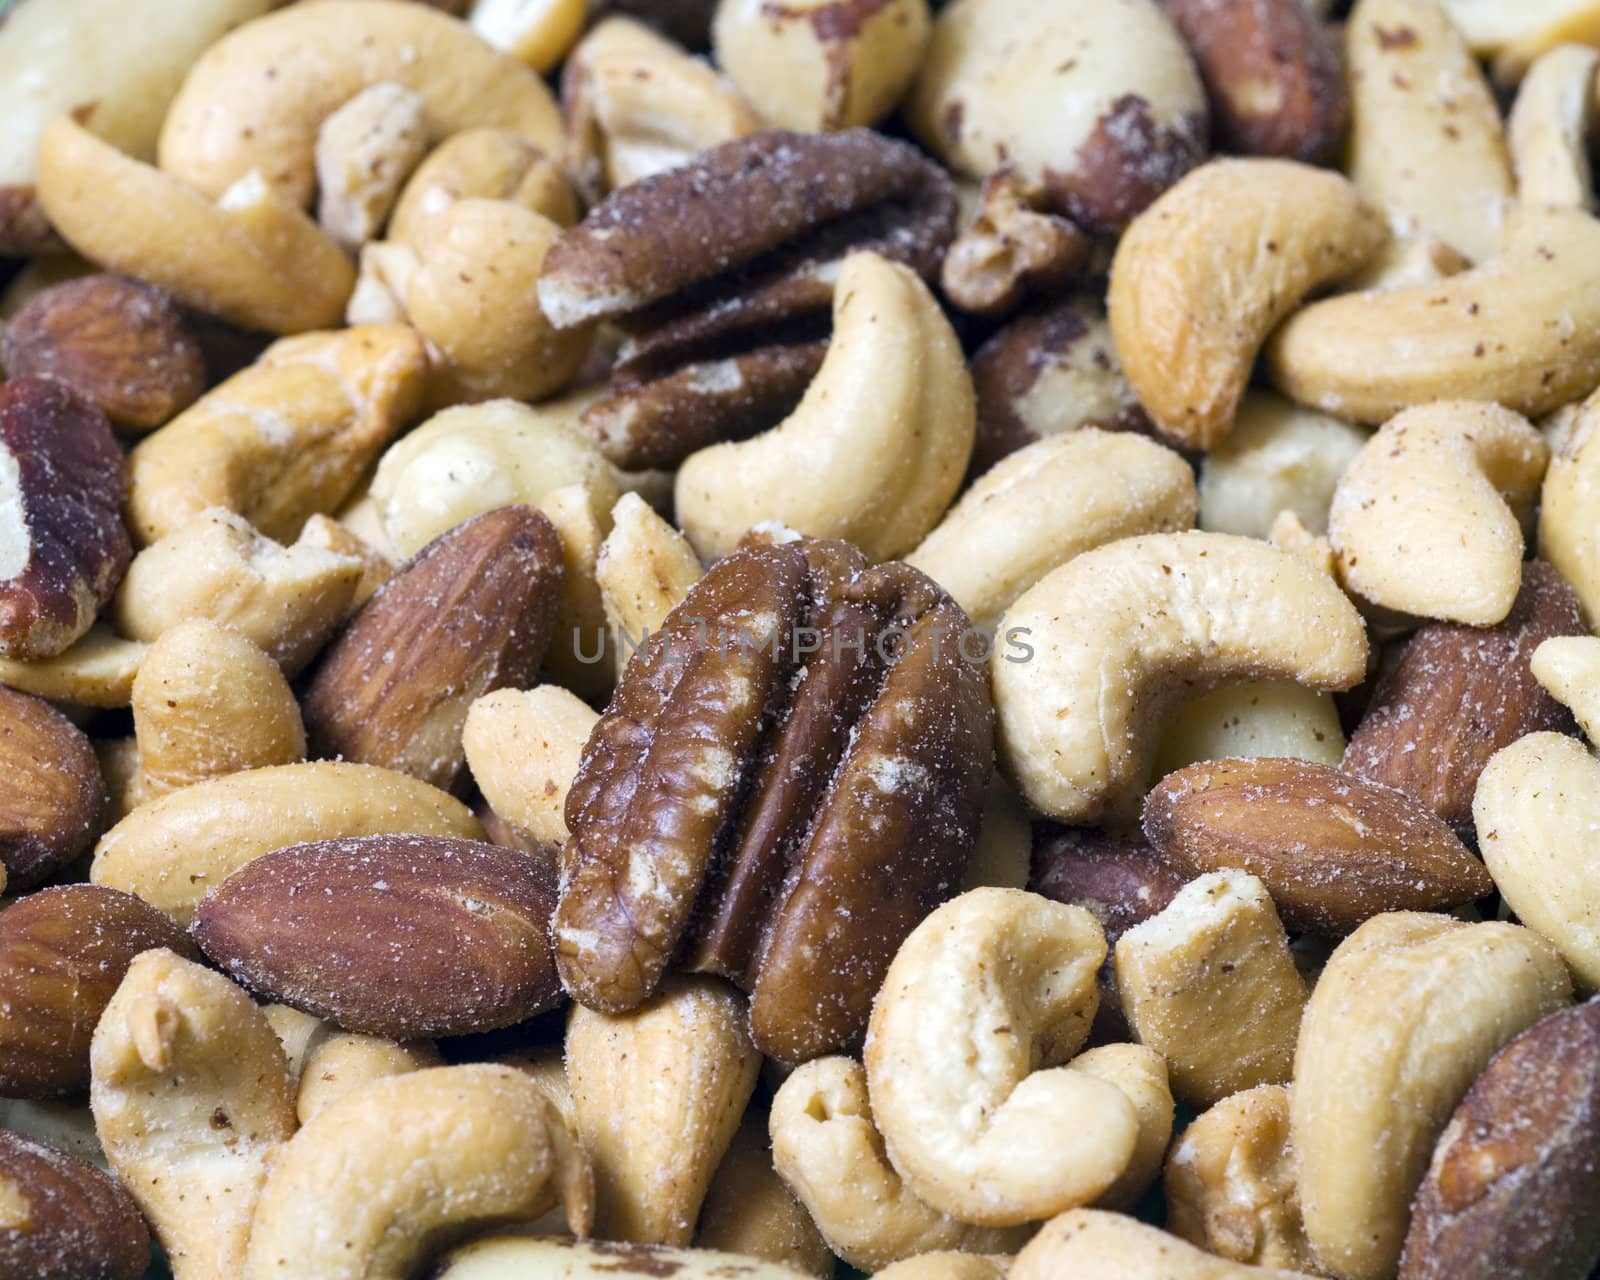 Macro shot with selective focus on a few of the foreground mixed nuts.